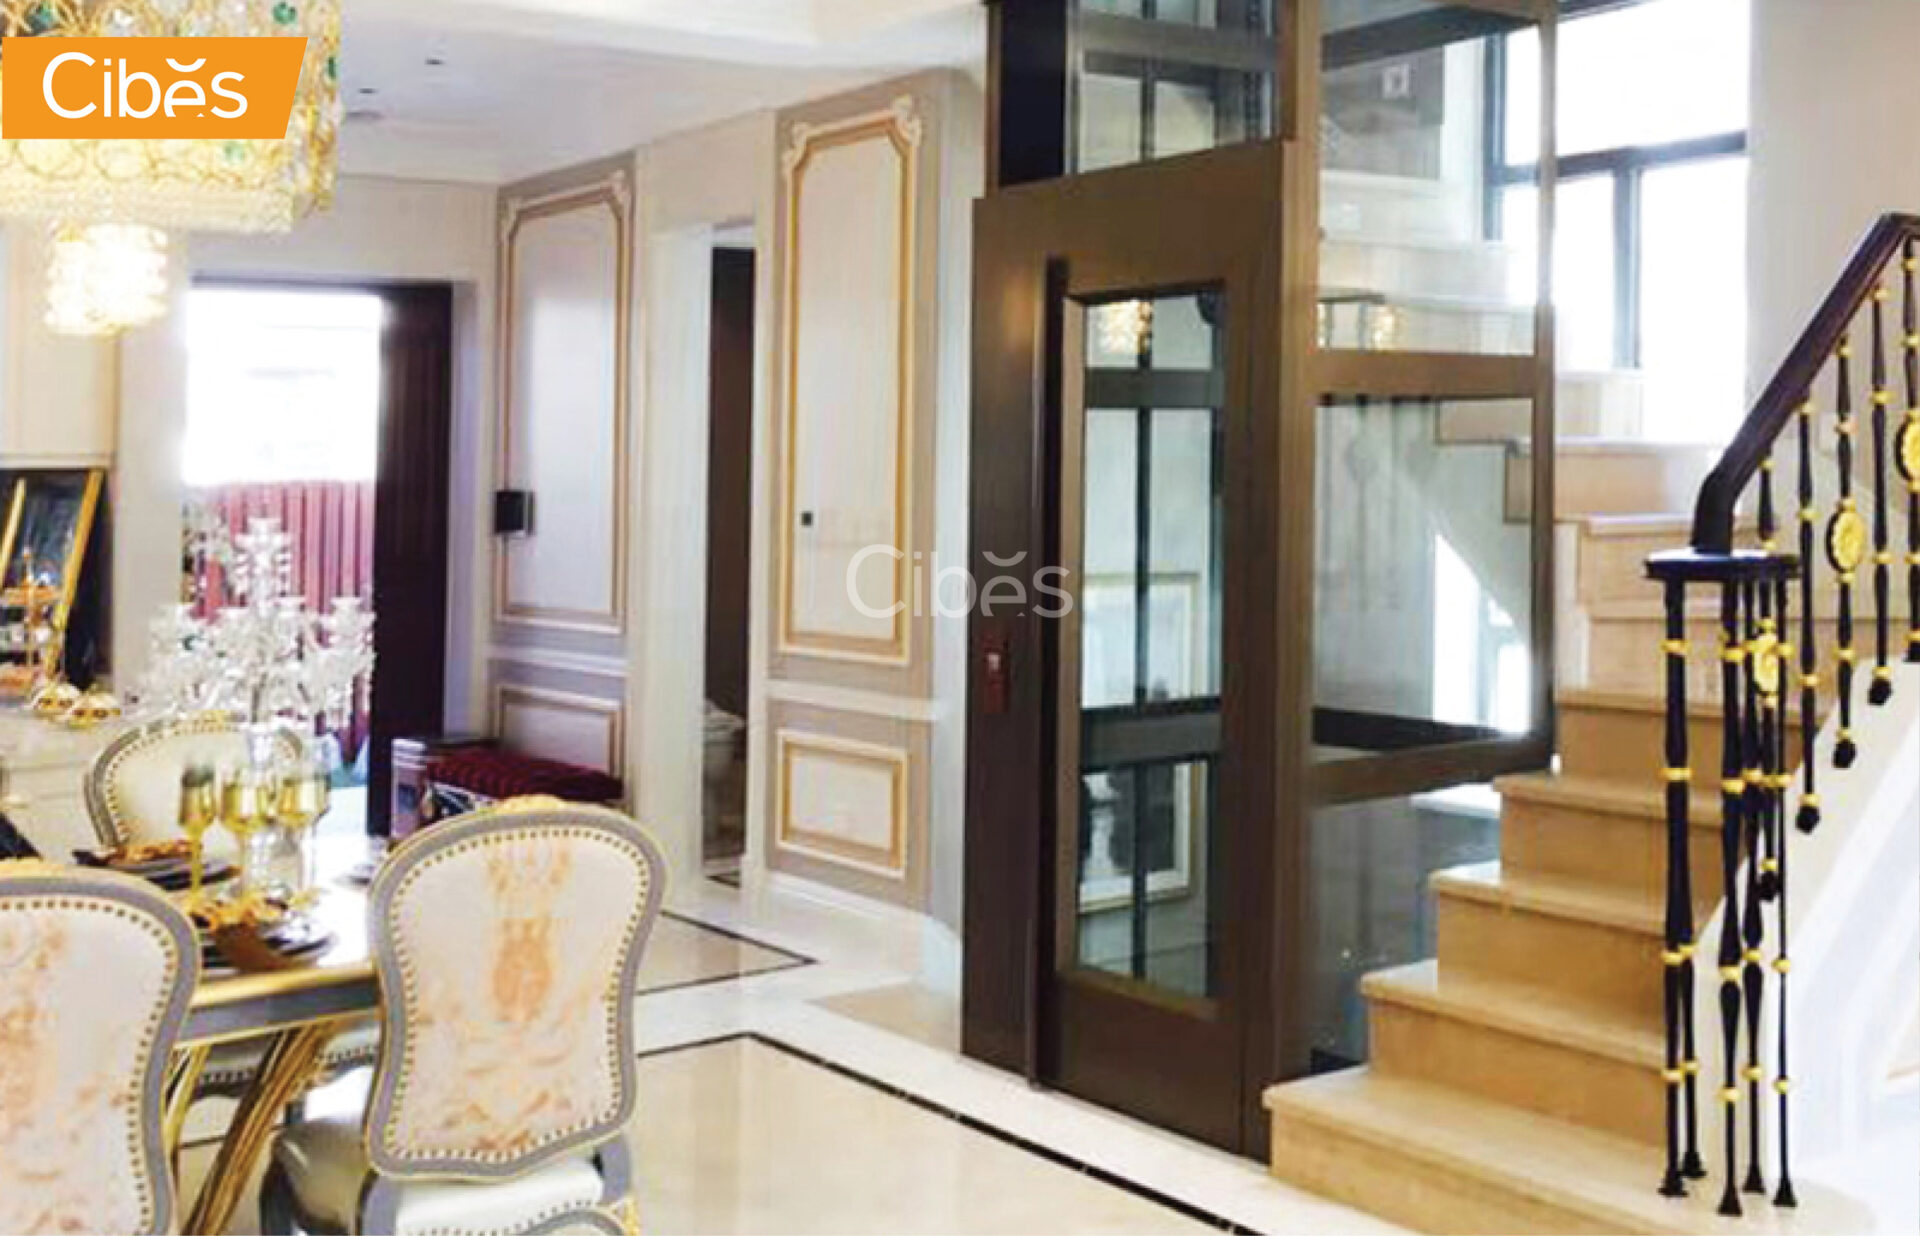 HOME LIFTS – Middle of stairs clas32